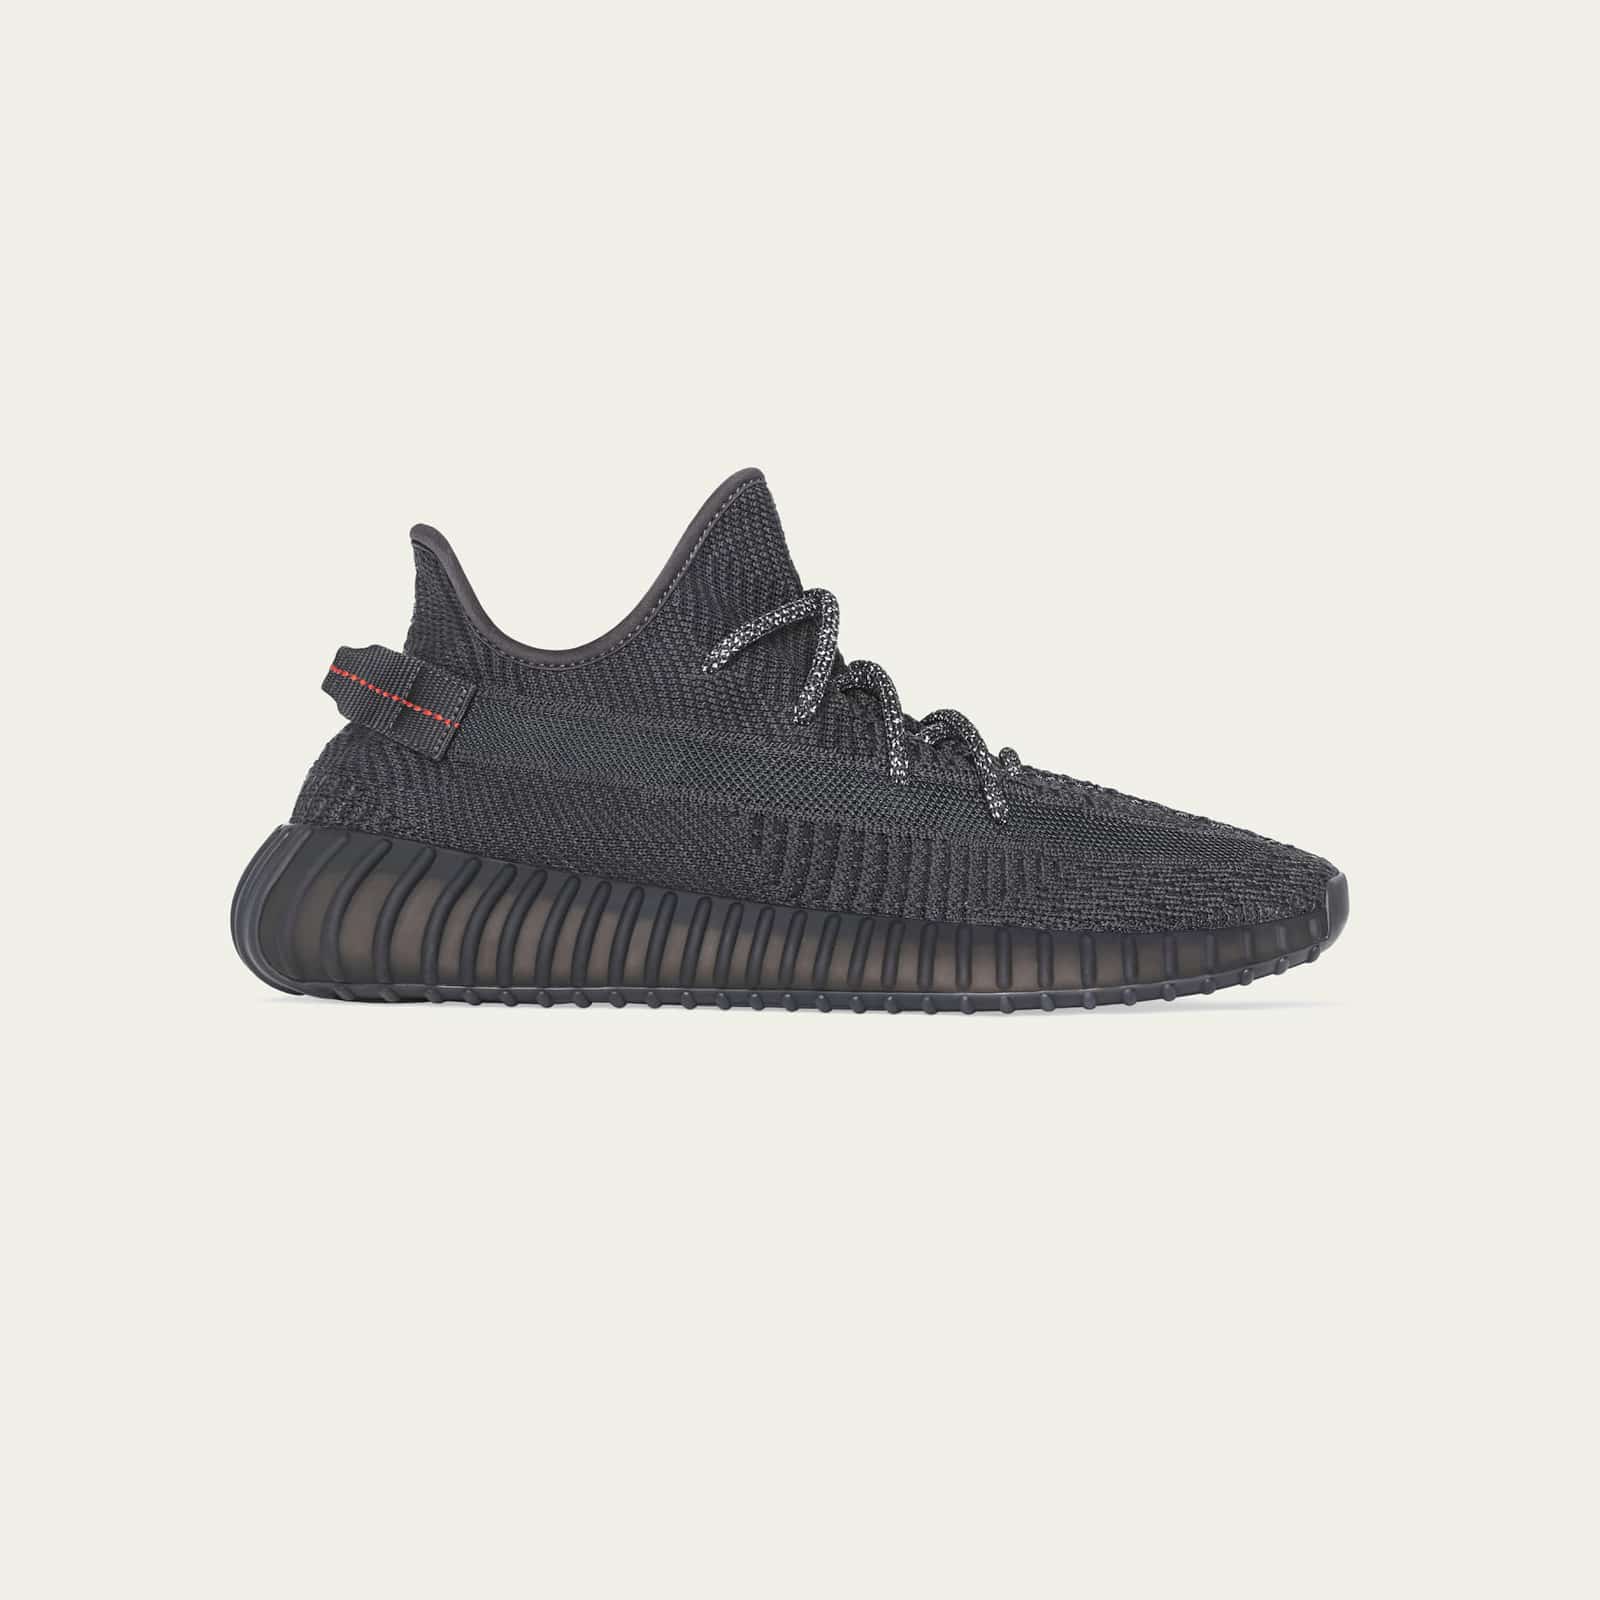 Yeezy Black Friday Restock Cheap Sale, UP TO 54% OFF